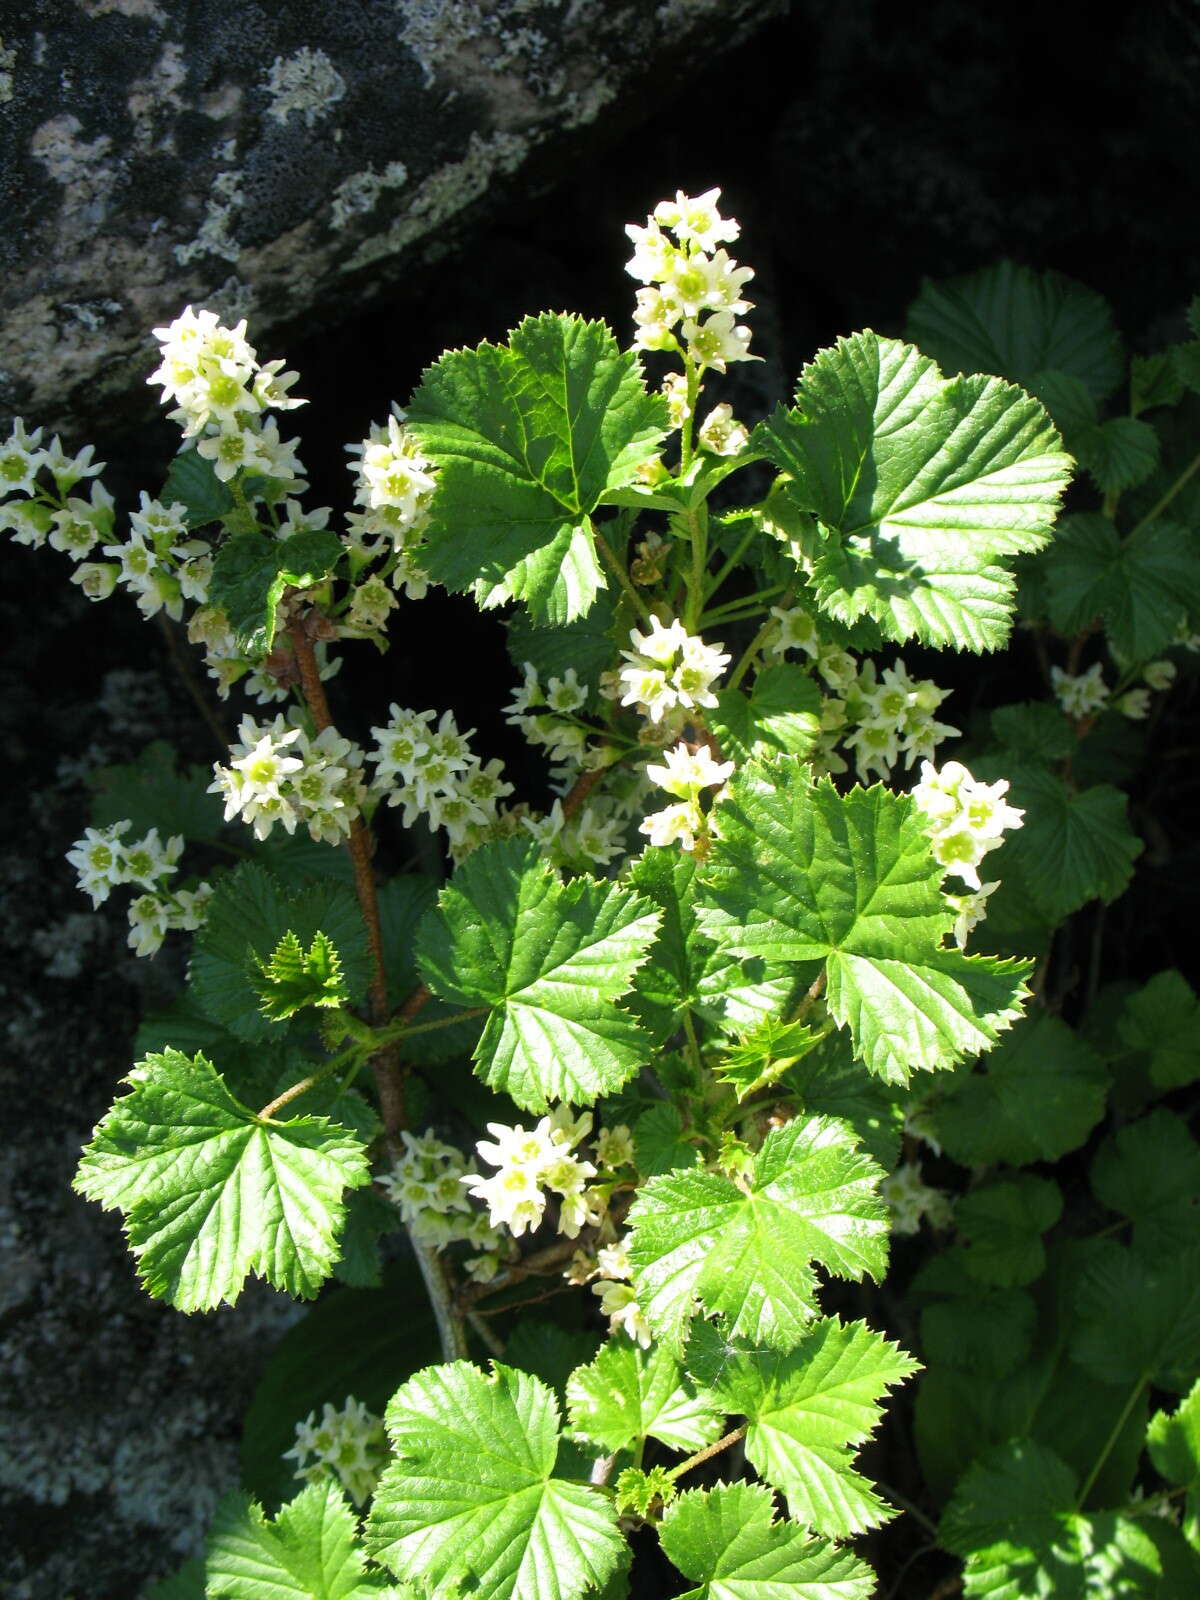 Image of Ribes fragrans Pall.